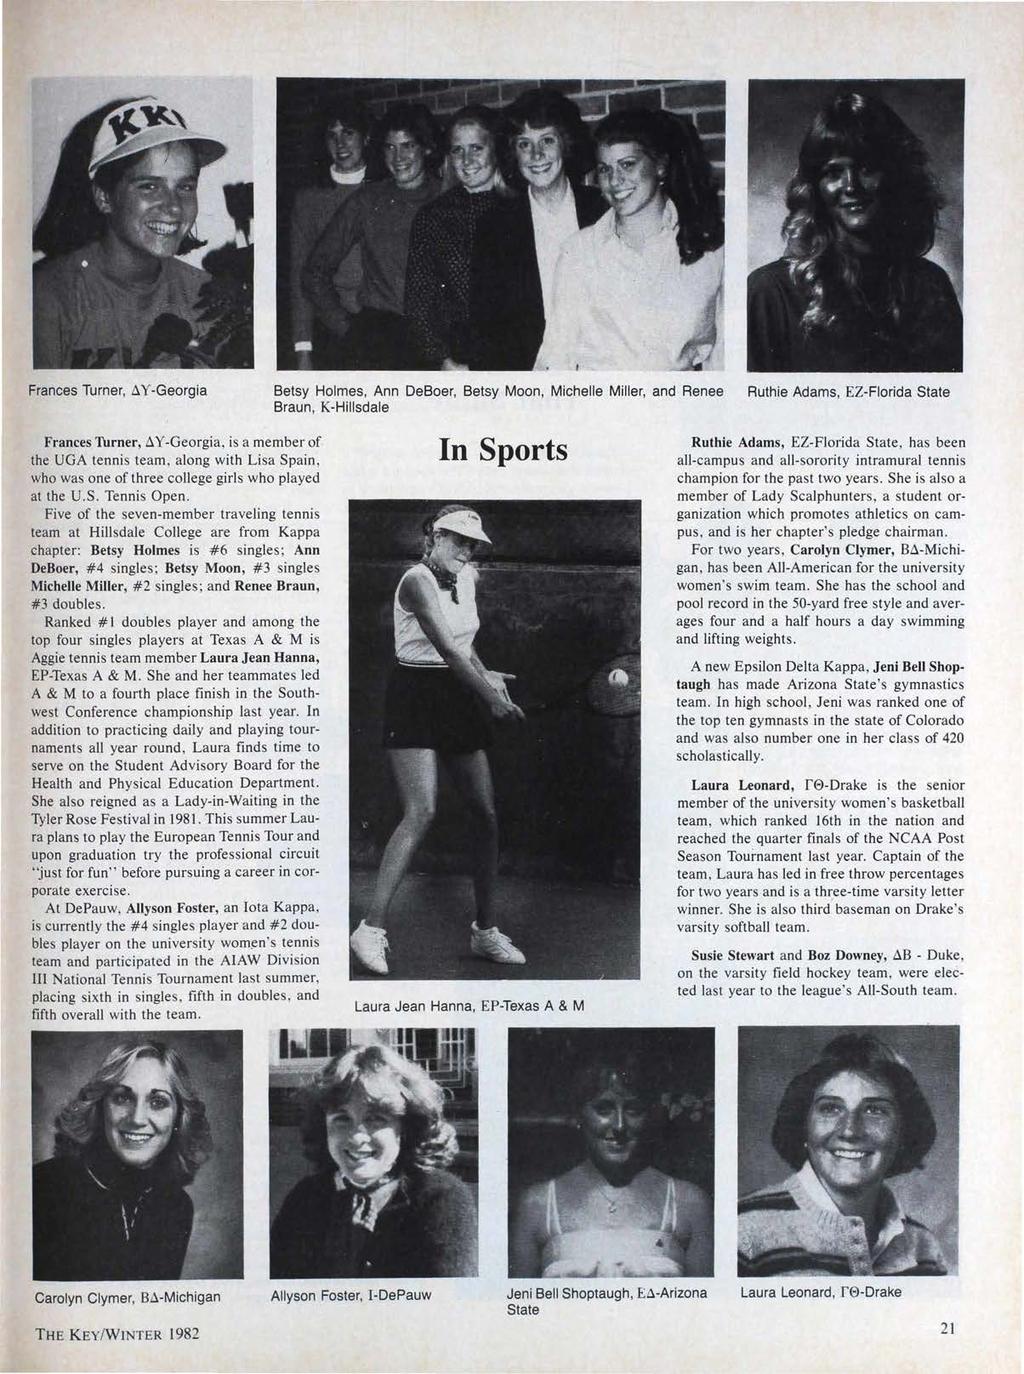 Frances Turner, t1 Y-Georgia Frances Thrner, tl Y-Georgia, is a member of the UGA tennis team, along with Lisa Spain, who was one of three college girls who played at the U.S. Tennis Open.